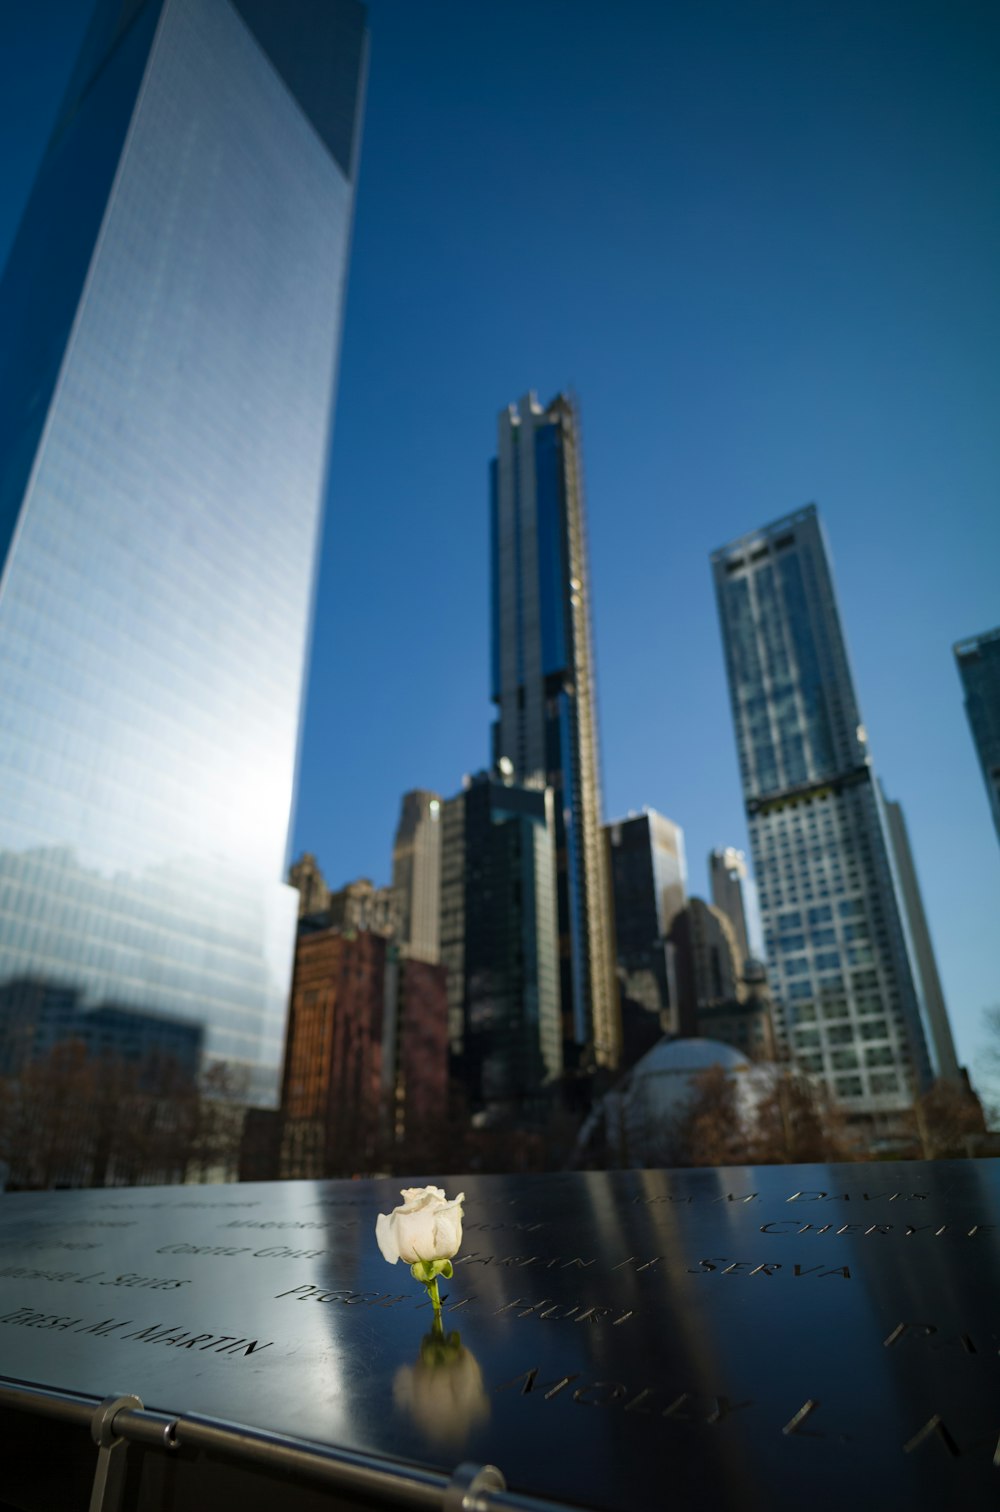 a white rose is placed on a memorial in front of skyscrapers